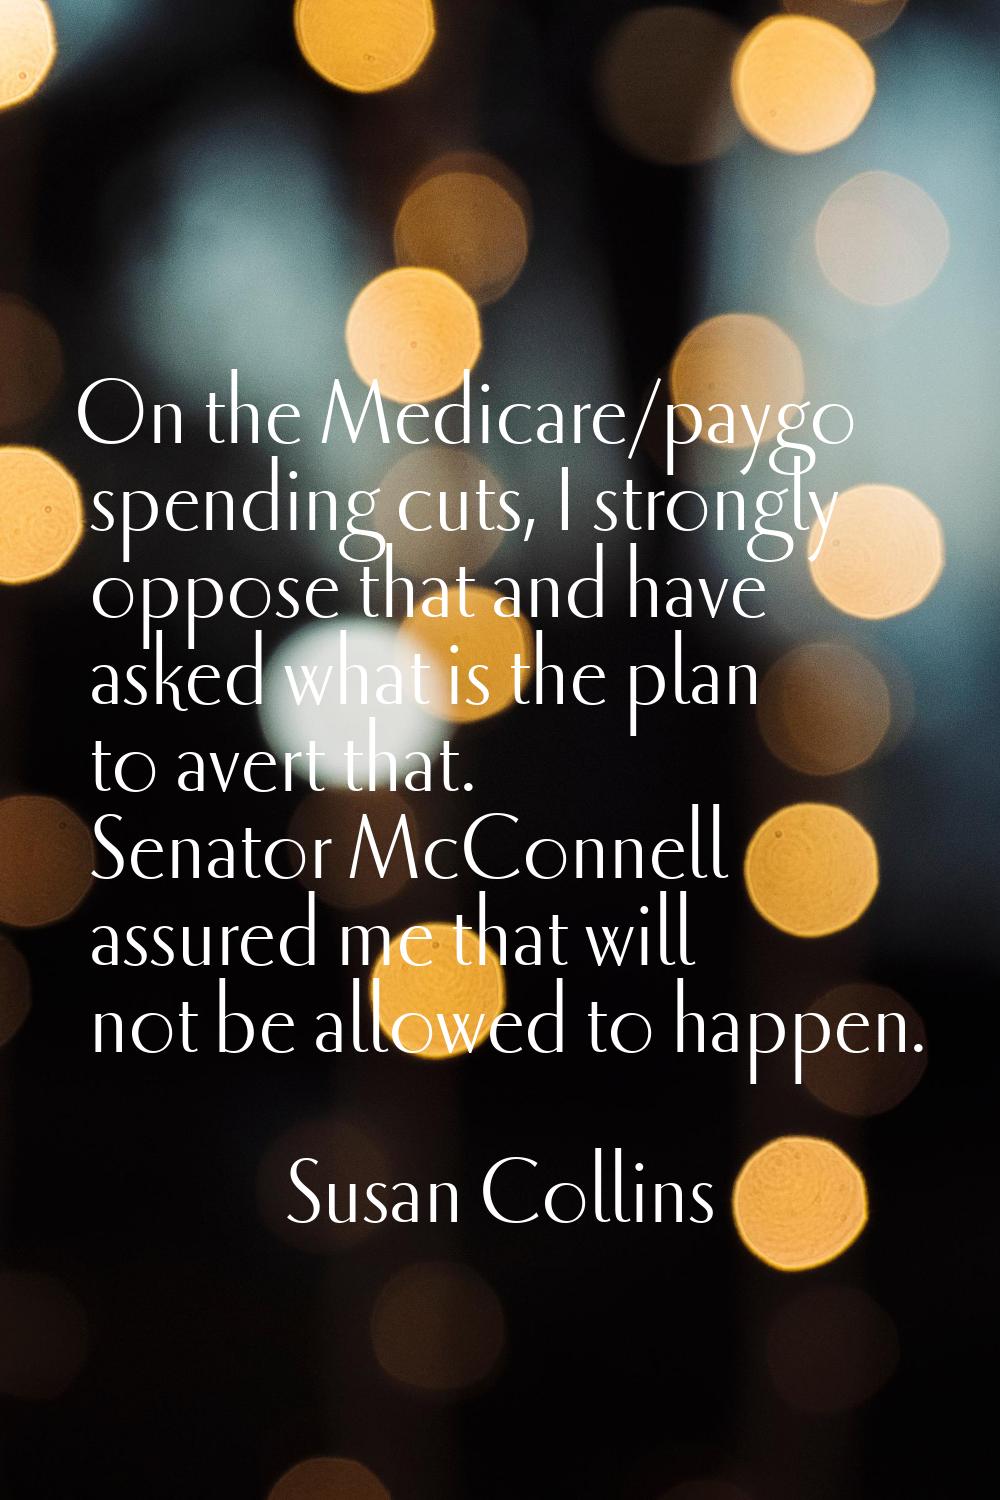 On the Medicare/paygo spending cuts, I strongly oppose that and have asked what is the plan to aver